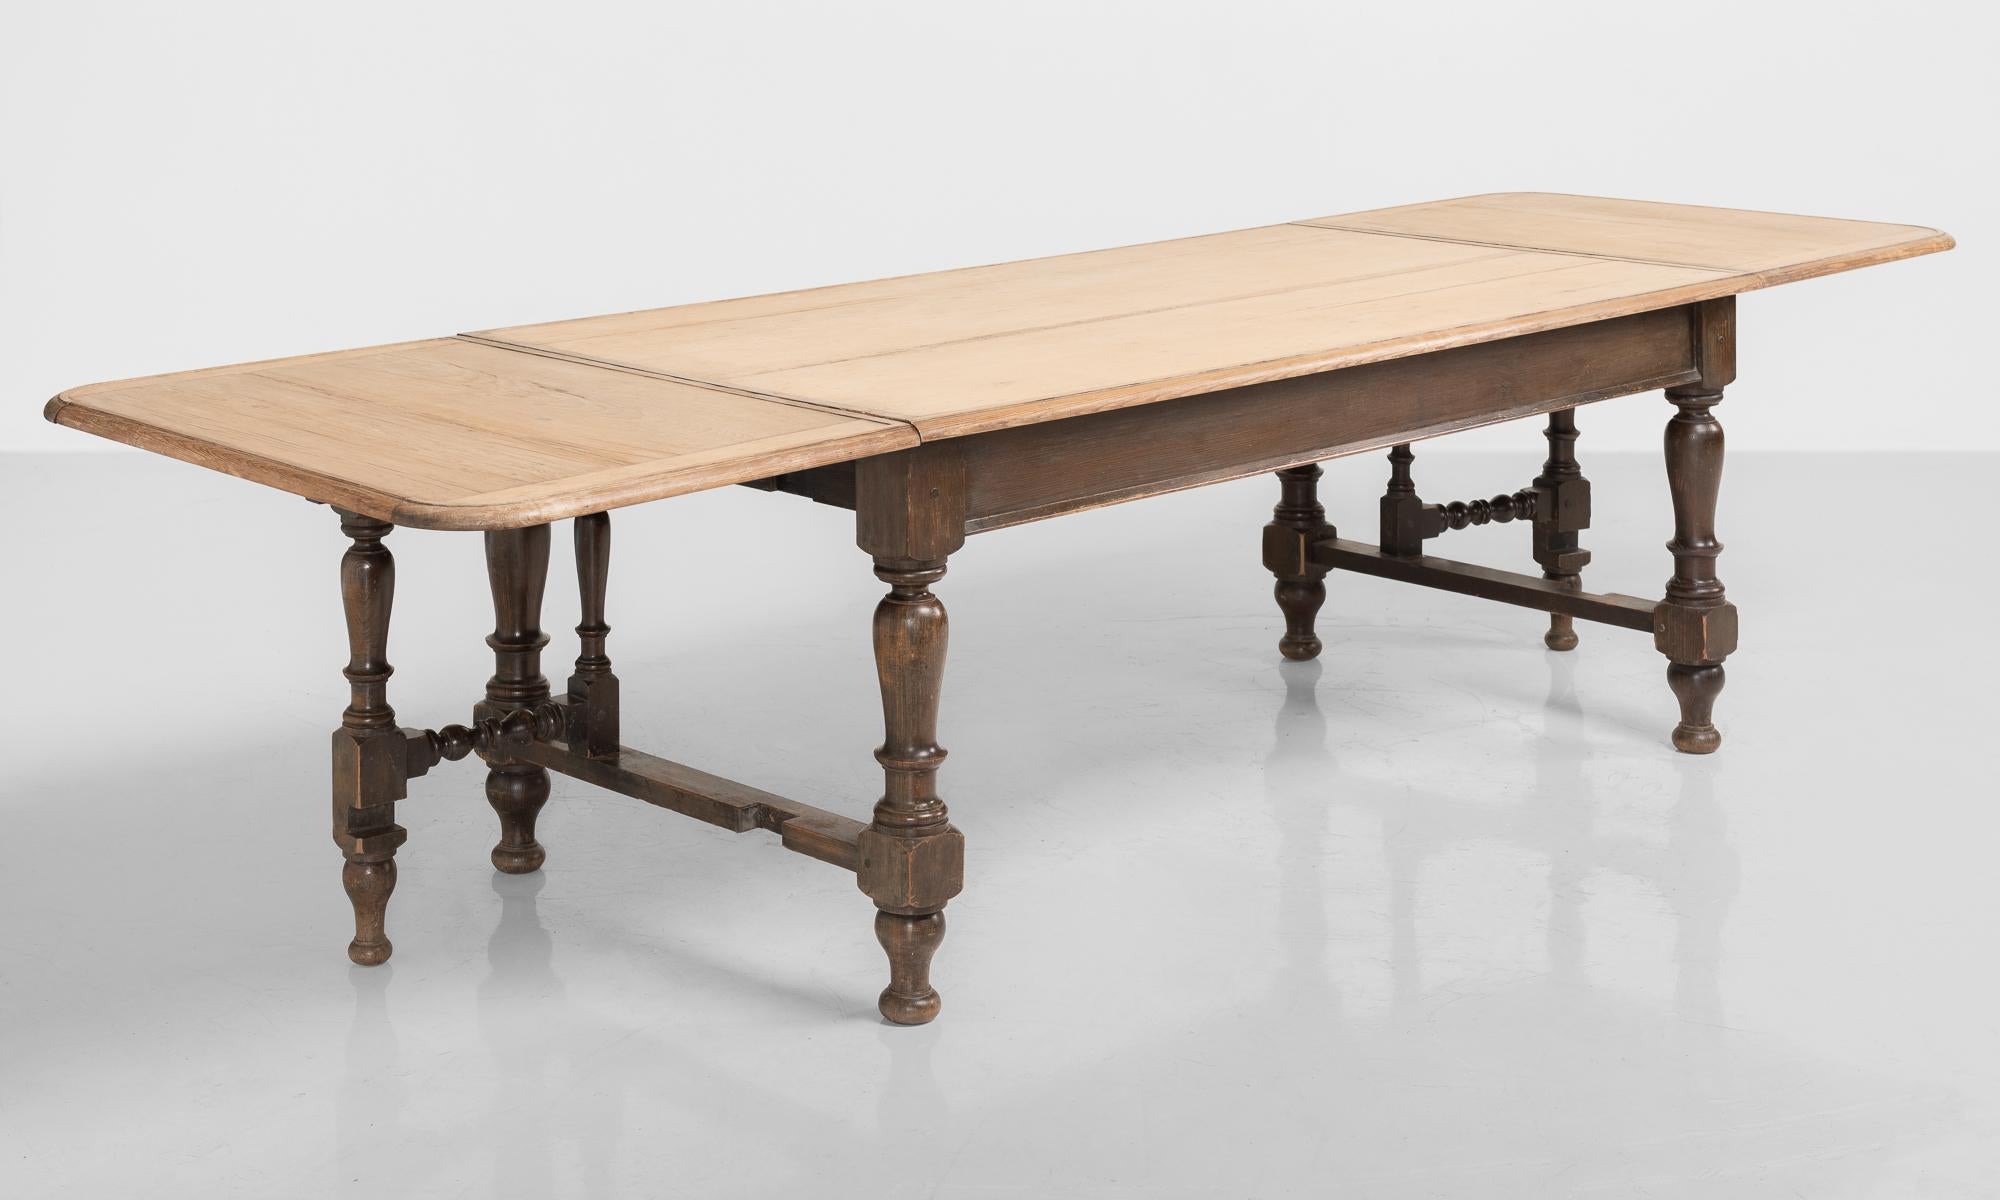 Lakeland Country Pine Dining Table, England, circa 1890

Scrubbed top on base with handsome turned legs and original finish.

Measures: 72.5